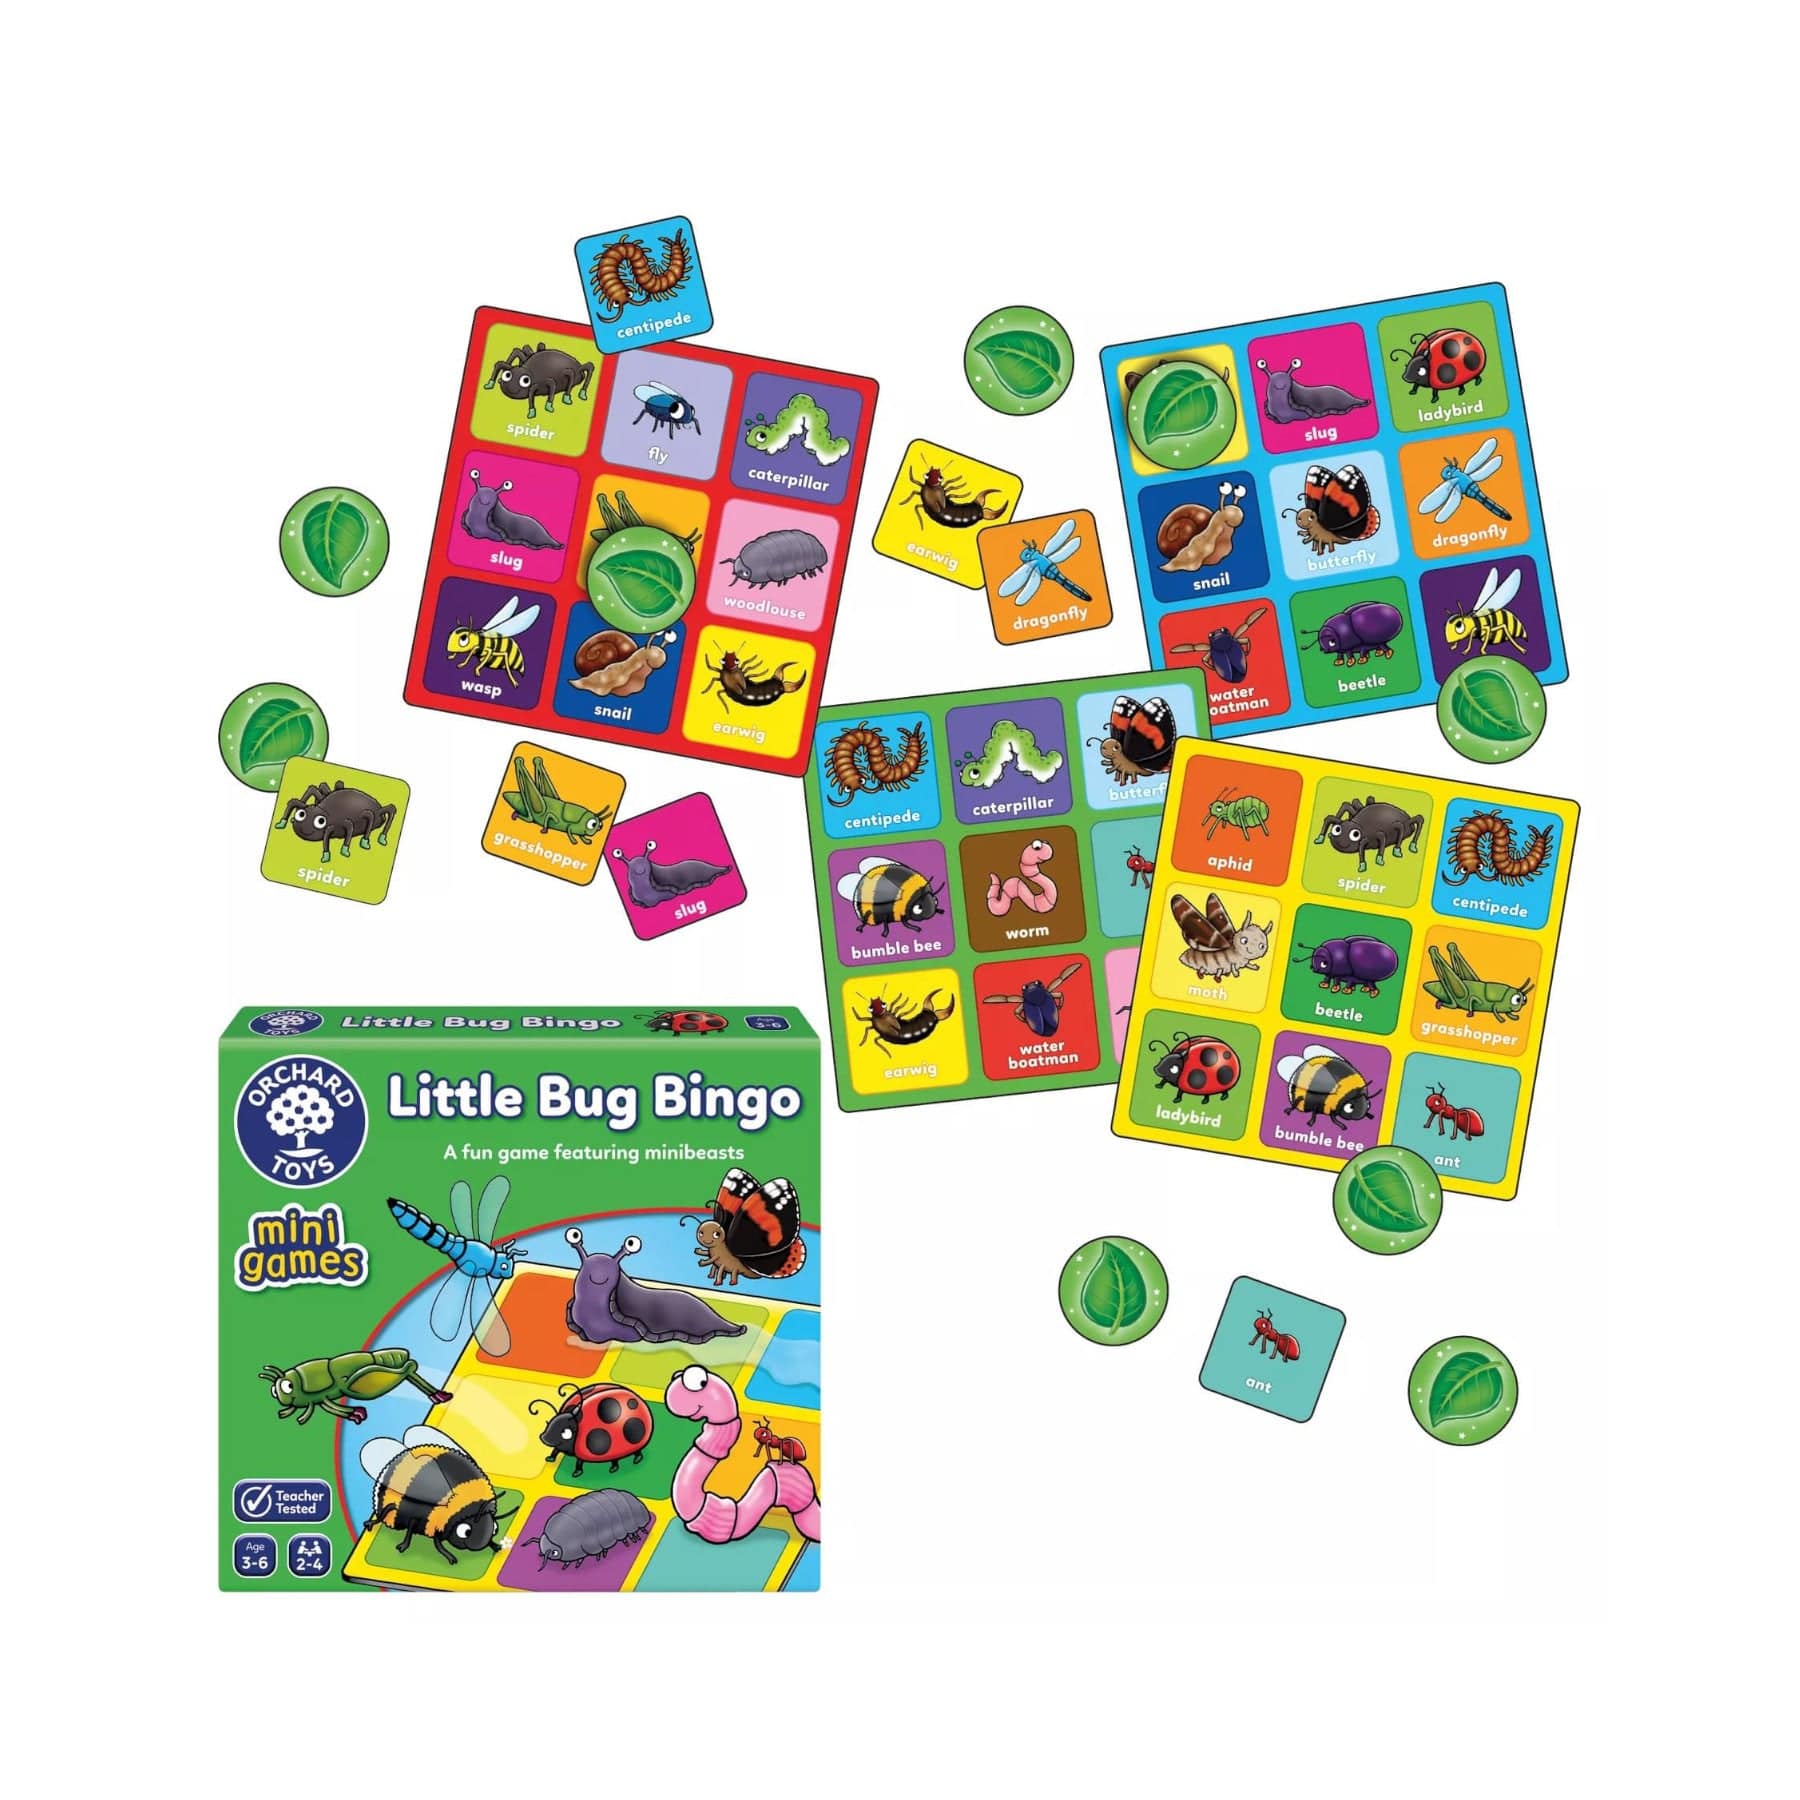 Children's educational game Little Bug Bingo with colorful illustration, insect-themed playing cards, chips, and cartoon bugs including ladybug, centipede, dragonfly, educational toys, engaging family game, Orchard Toys Mini Games series, learning and fun.